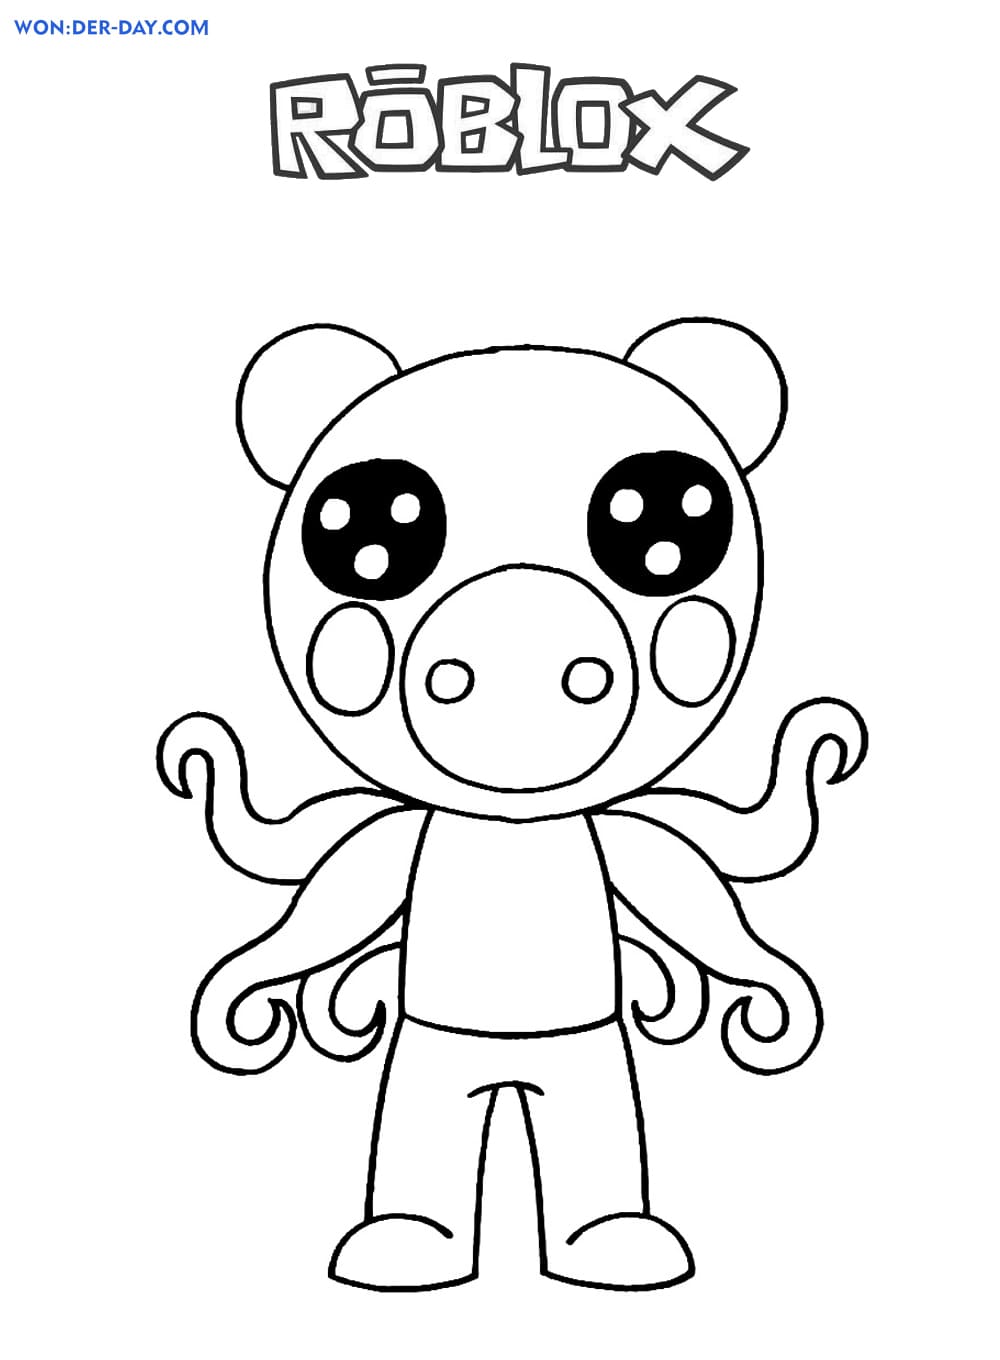 Piggy Roblox Coloring Pages Wonder Day Coloring Pages For Children And Adults - roblox piggy characters coloring pages